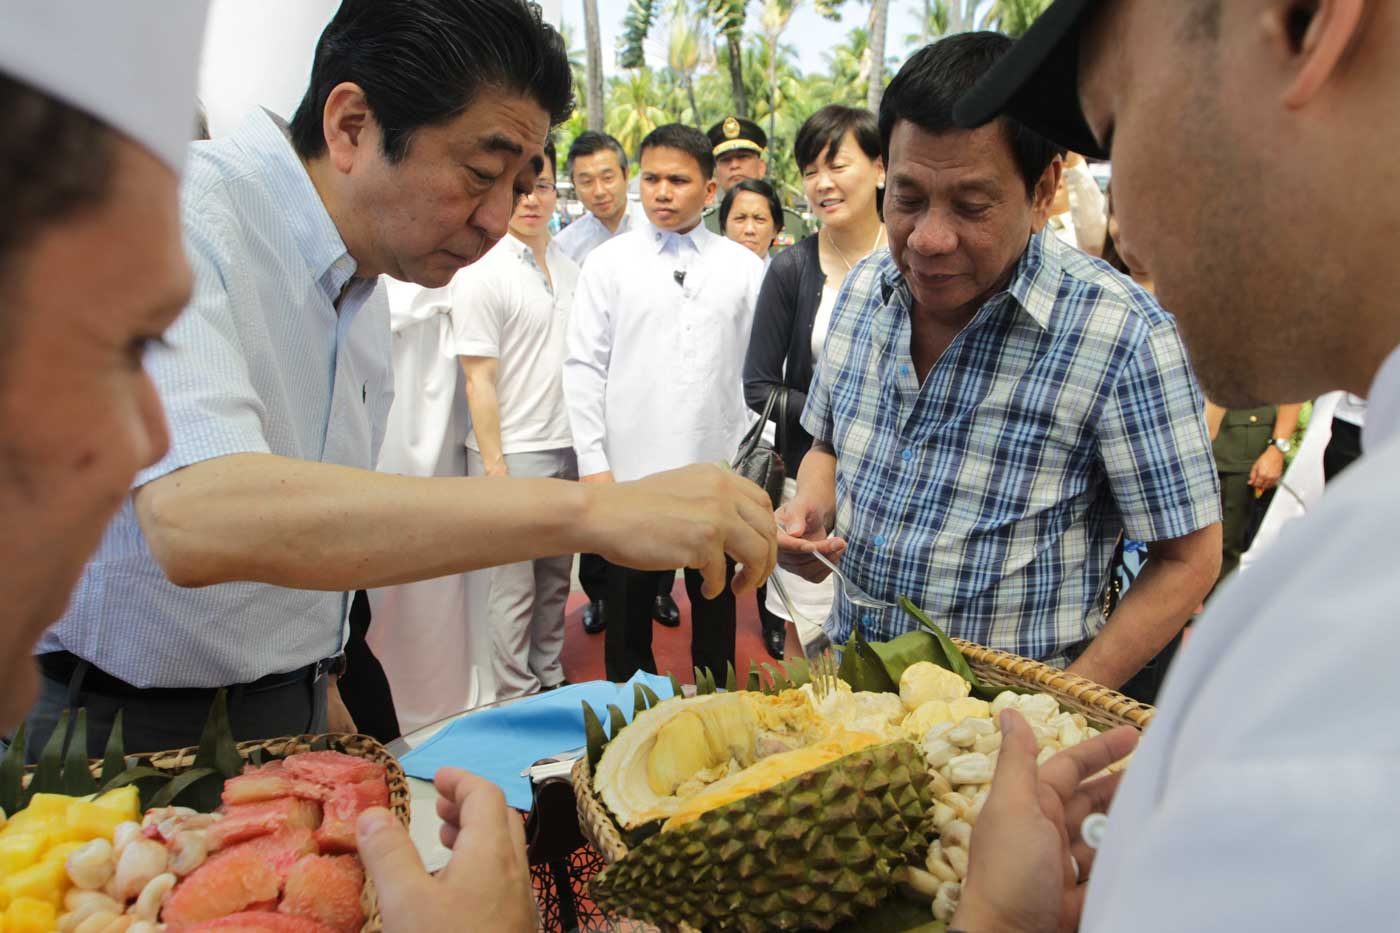 TASTE OF DAVAO. Japan Prime Minister Shinzo Abe eats durian fruit with President Rodrigo Duterte after attending various events at the Waterfront Hotel in Davao City on January 13, 2017. Photo by Simeon Celi, Jr./PPD 